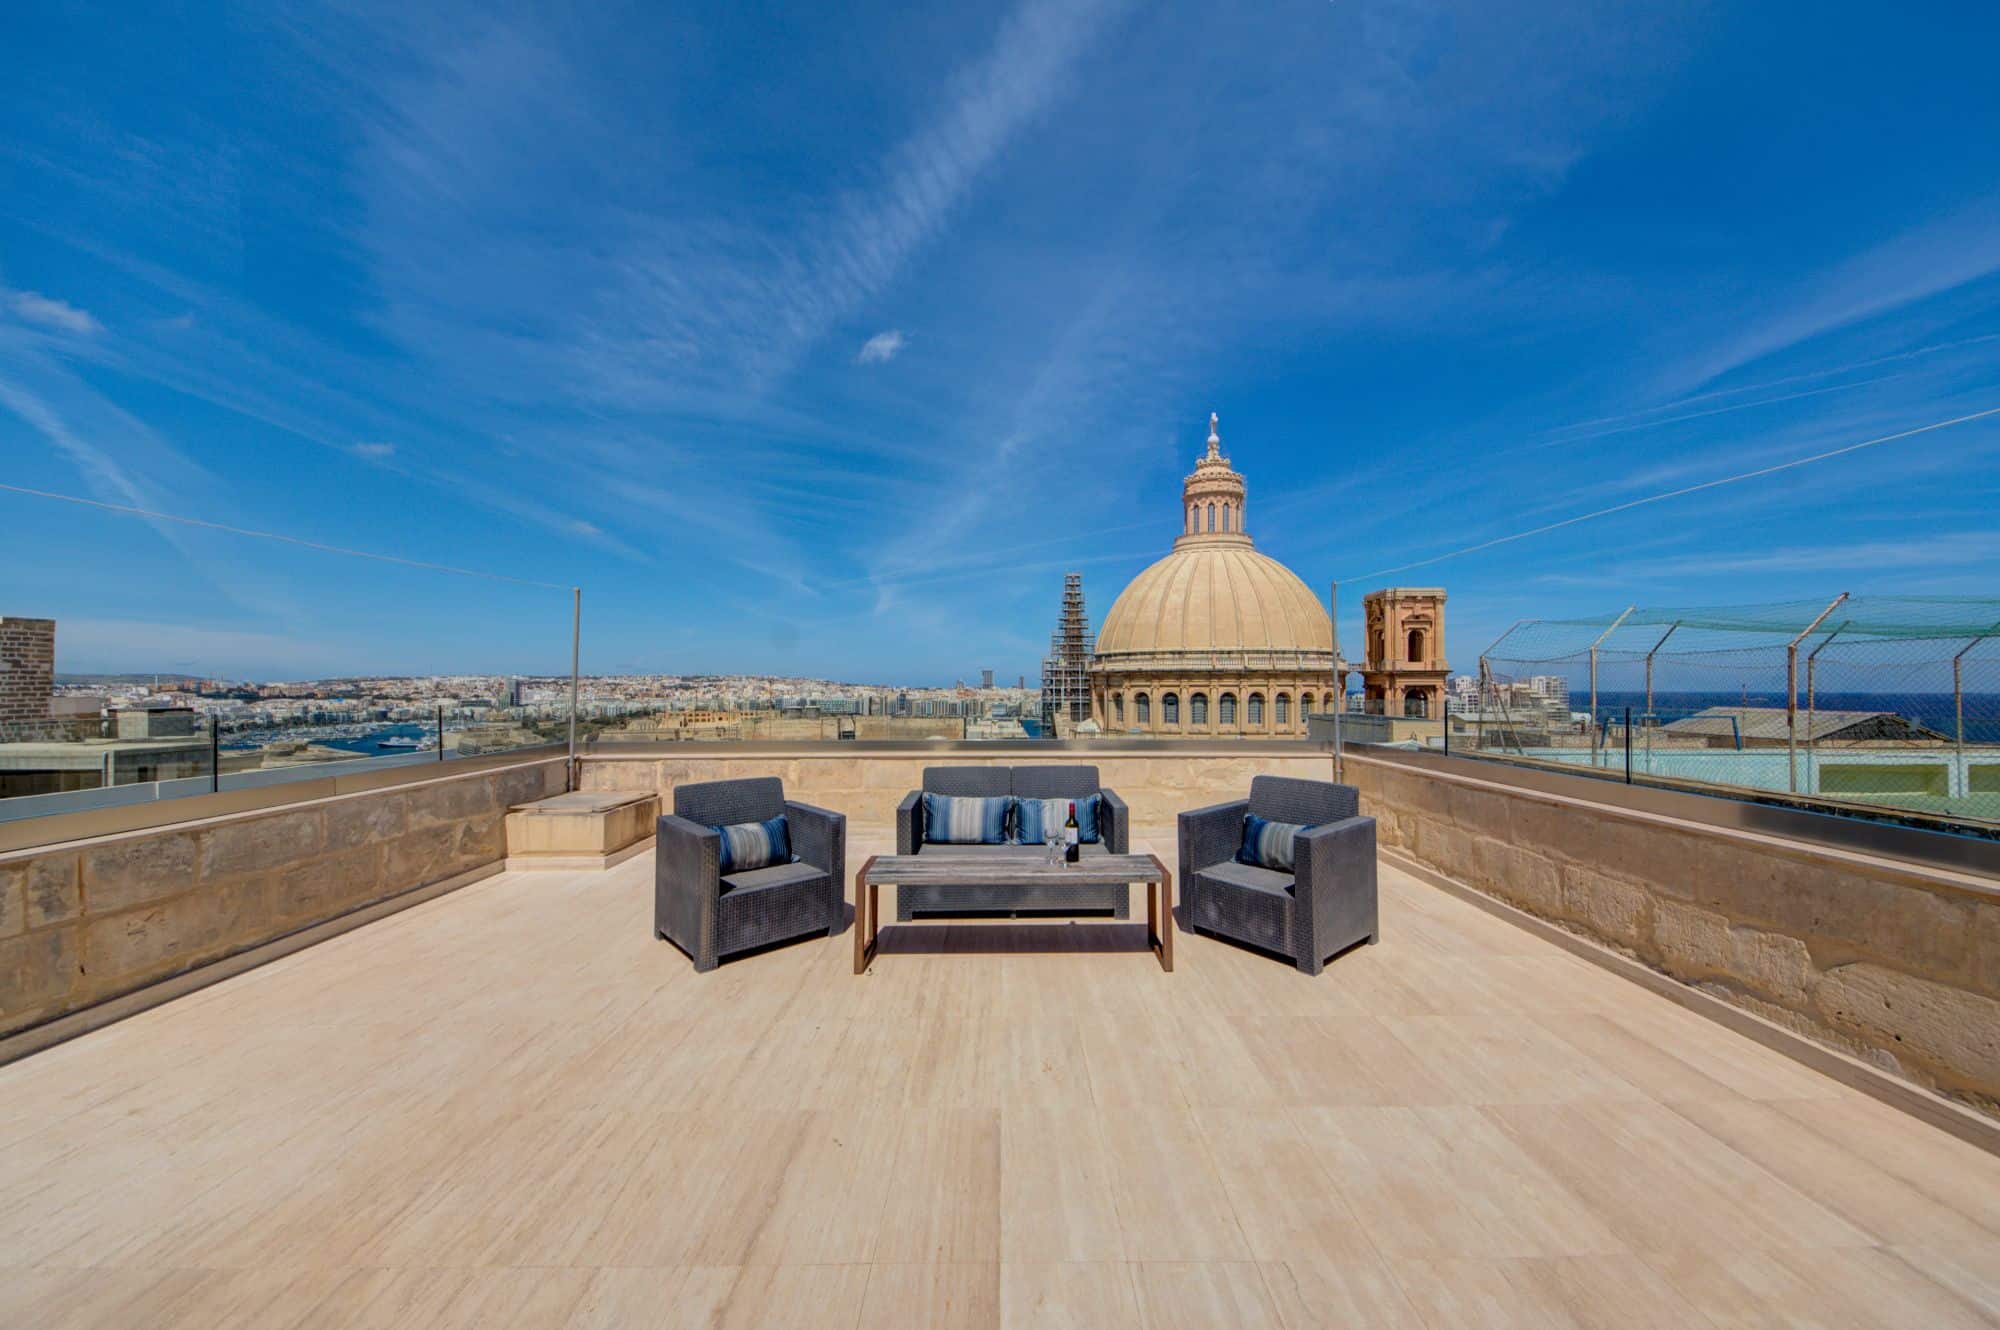 Panoramic view of Valletta's historic streets from the balcony of a Deluxe Double Room at The Manoel Boutique Hotel, showcasing the vibrant lifestyle and architectural beauty of Malta's capital city.